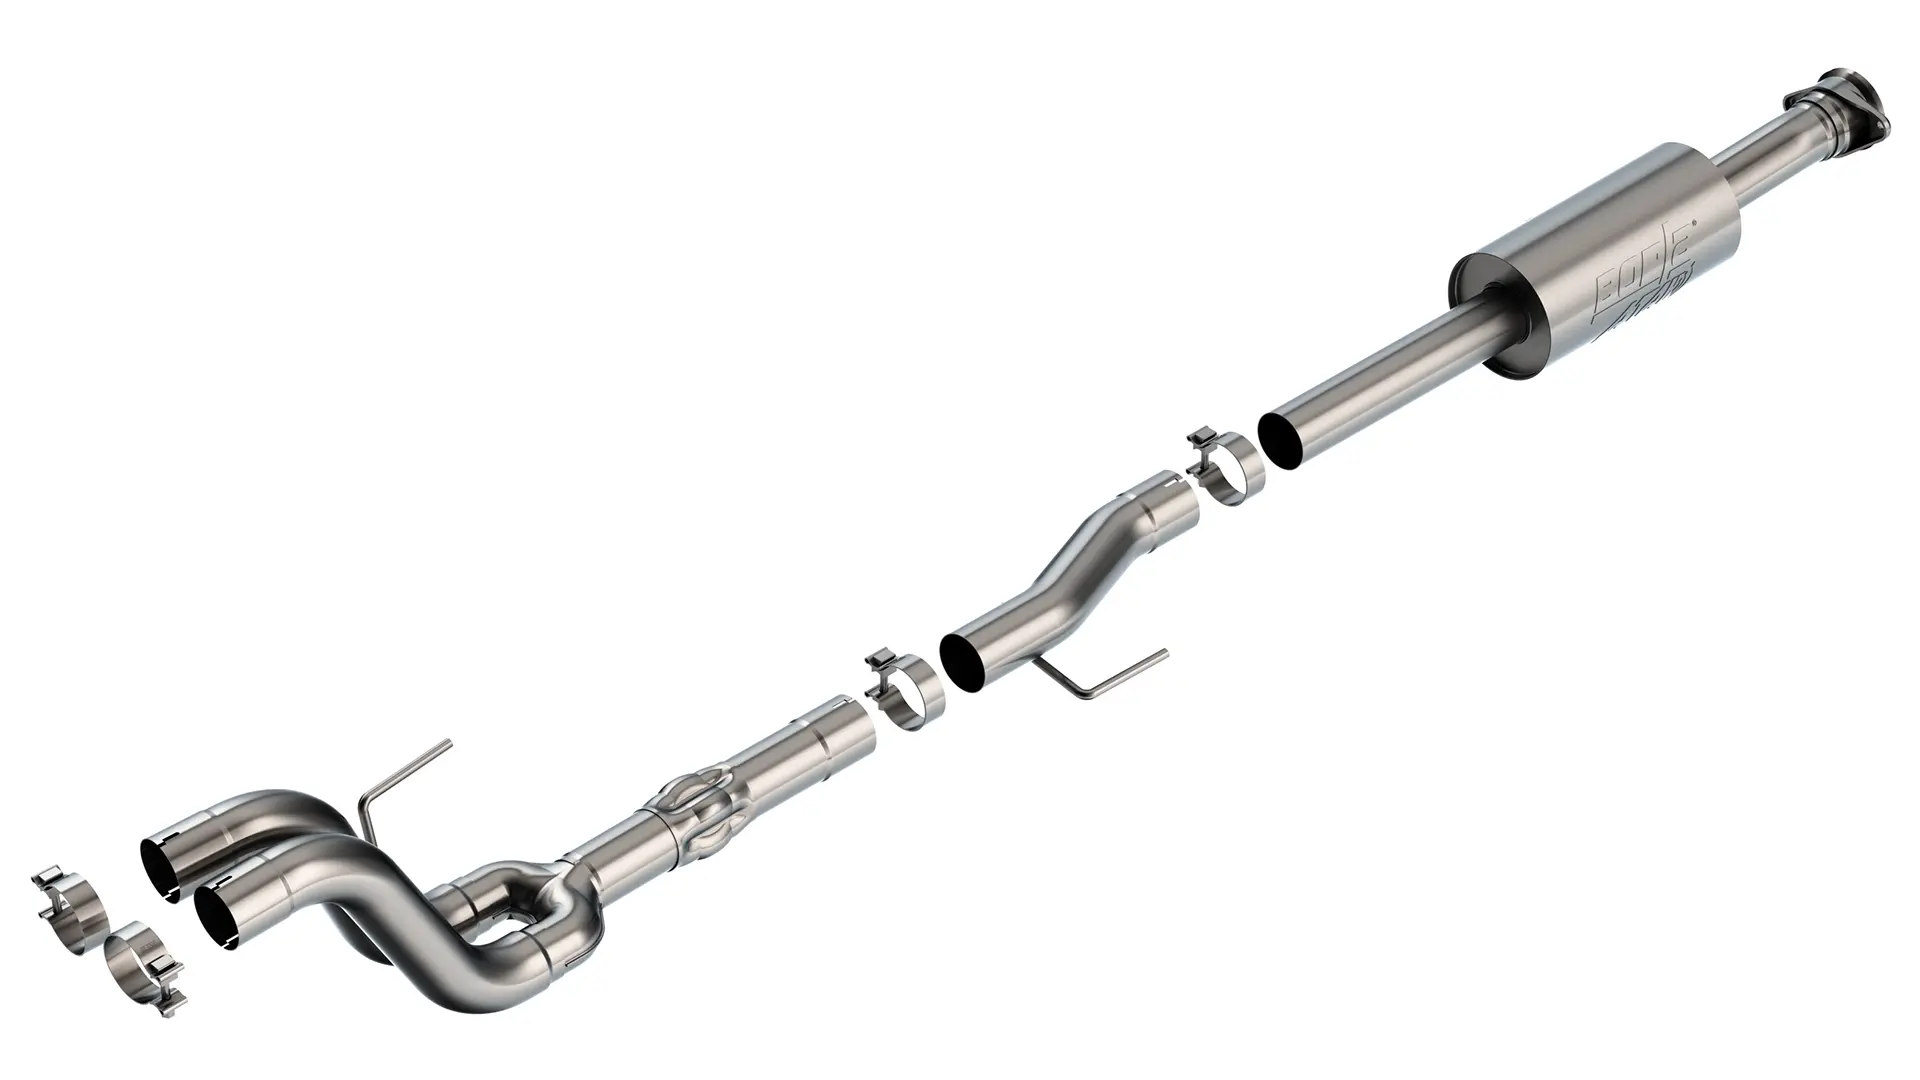 Borla ATAK Mid-Section Exhaust for the Ford F-150 Tremor